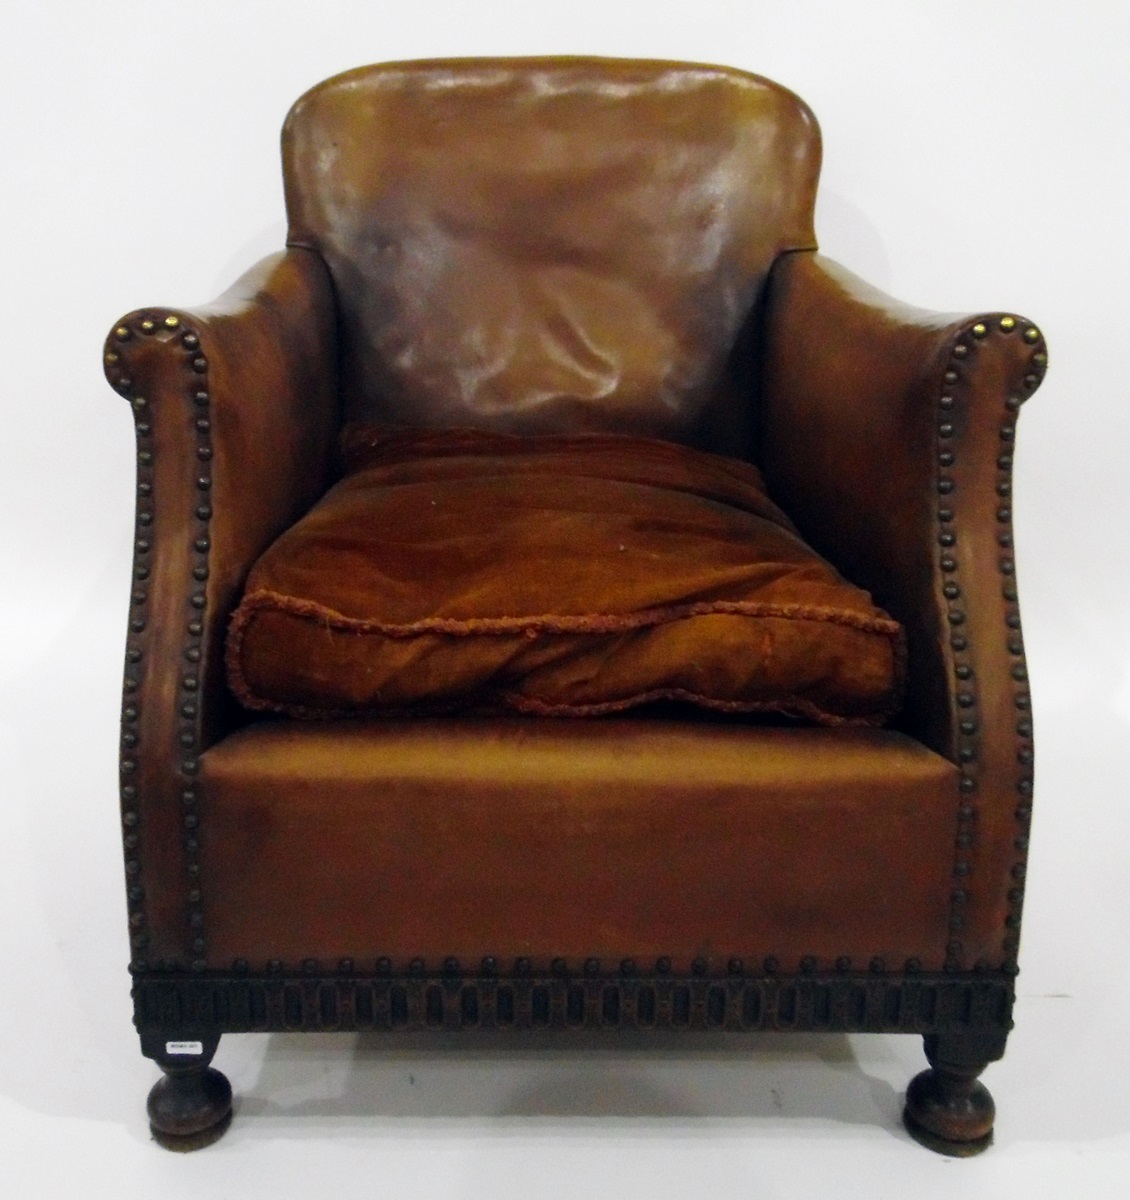 Early 20th century studded hide upholstered easy chair